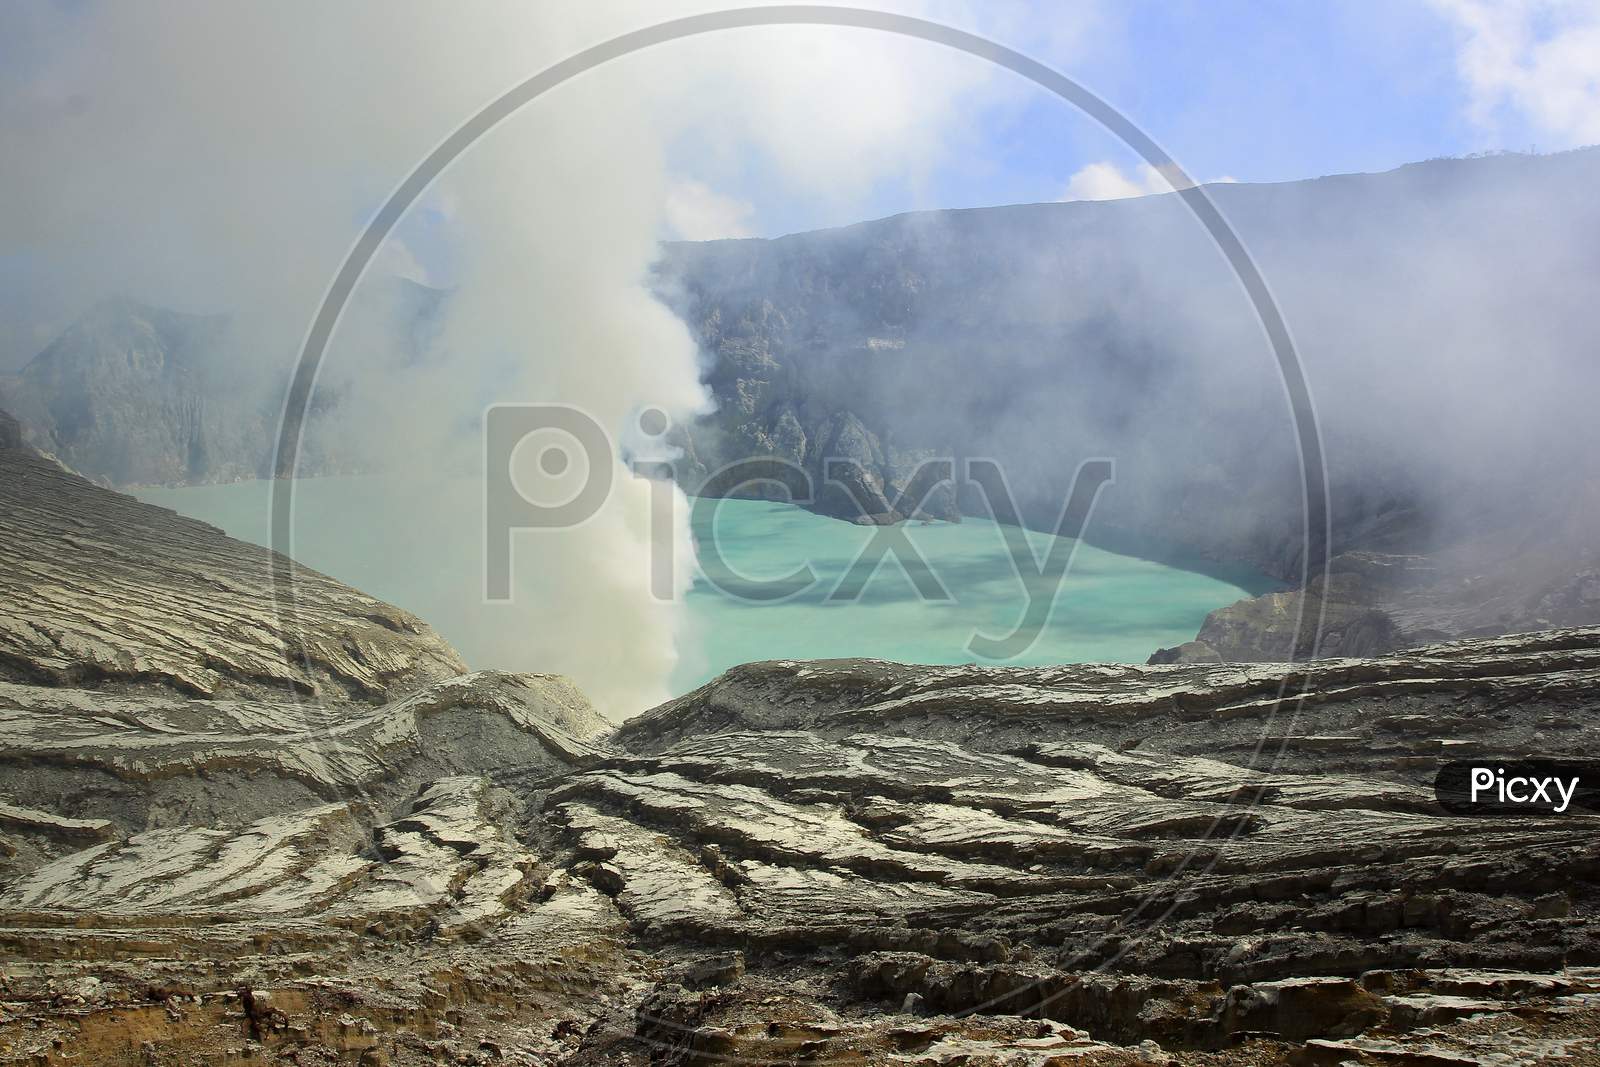 Mount ijen or better known as Ijen Crater has a caldera wall as high as 300 to 500 meters